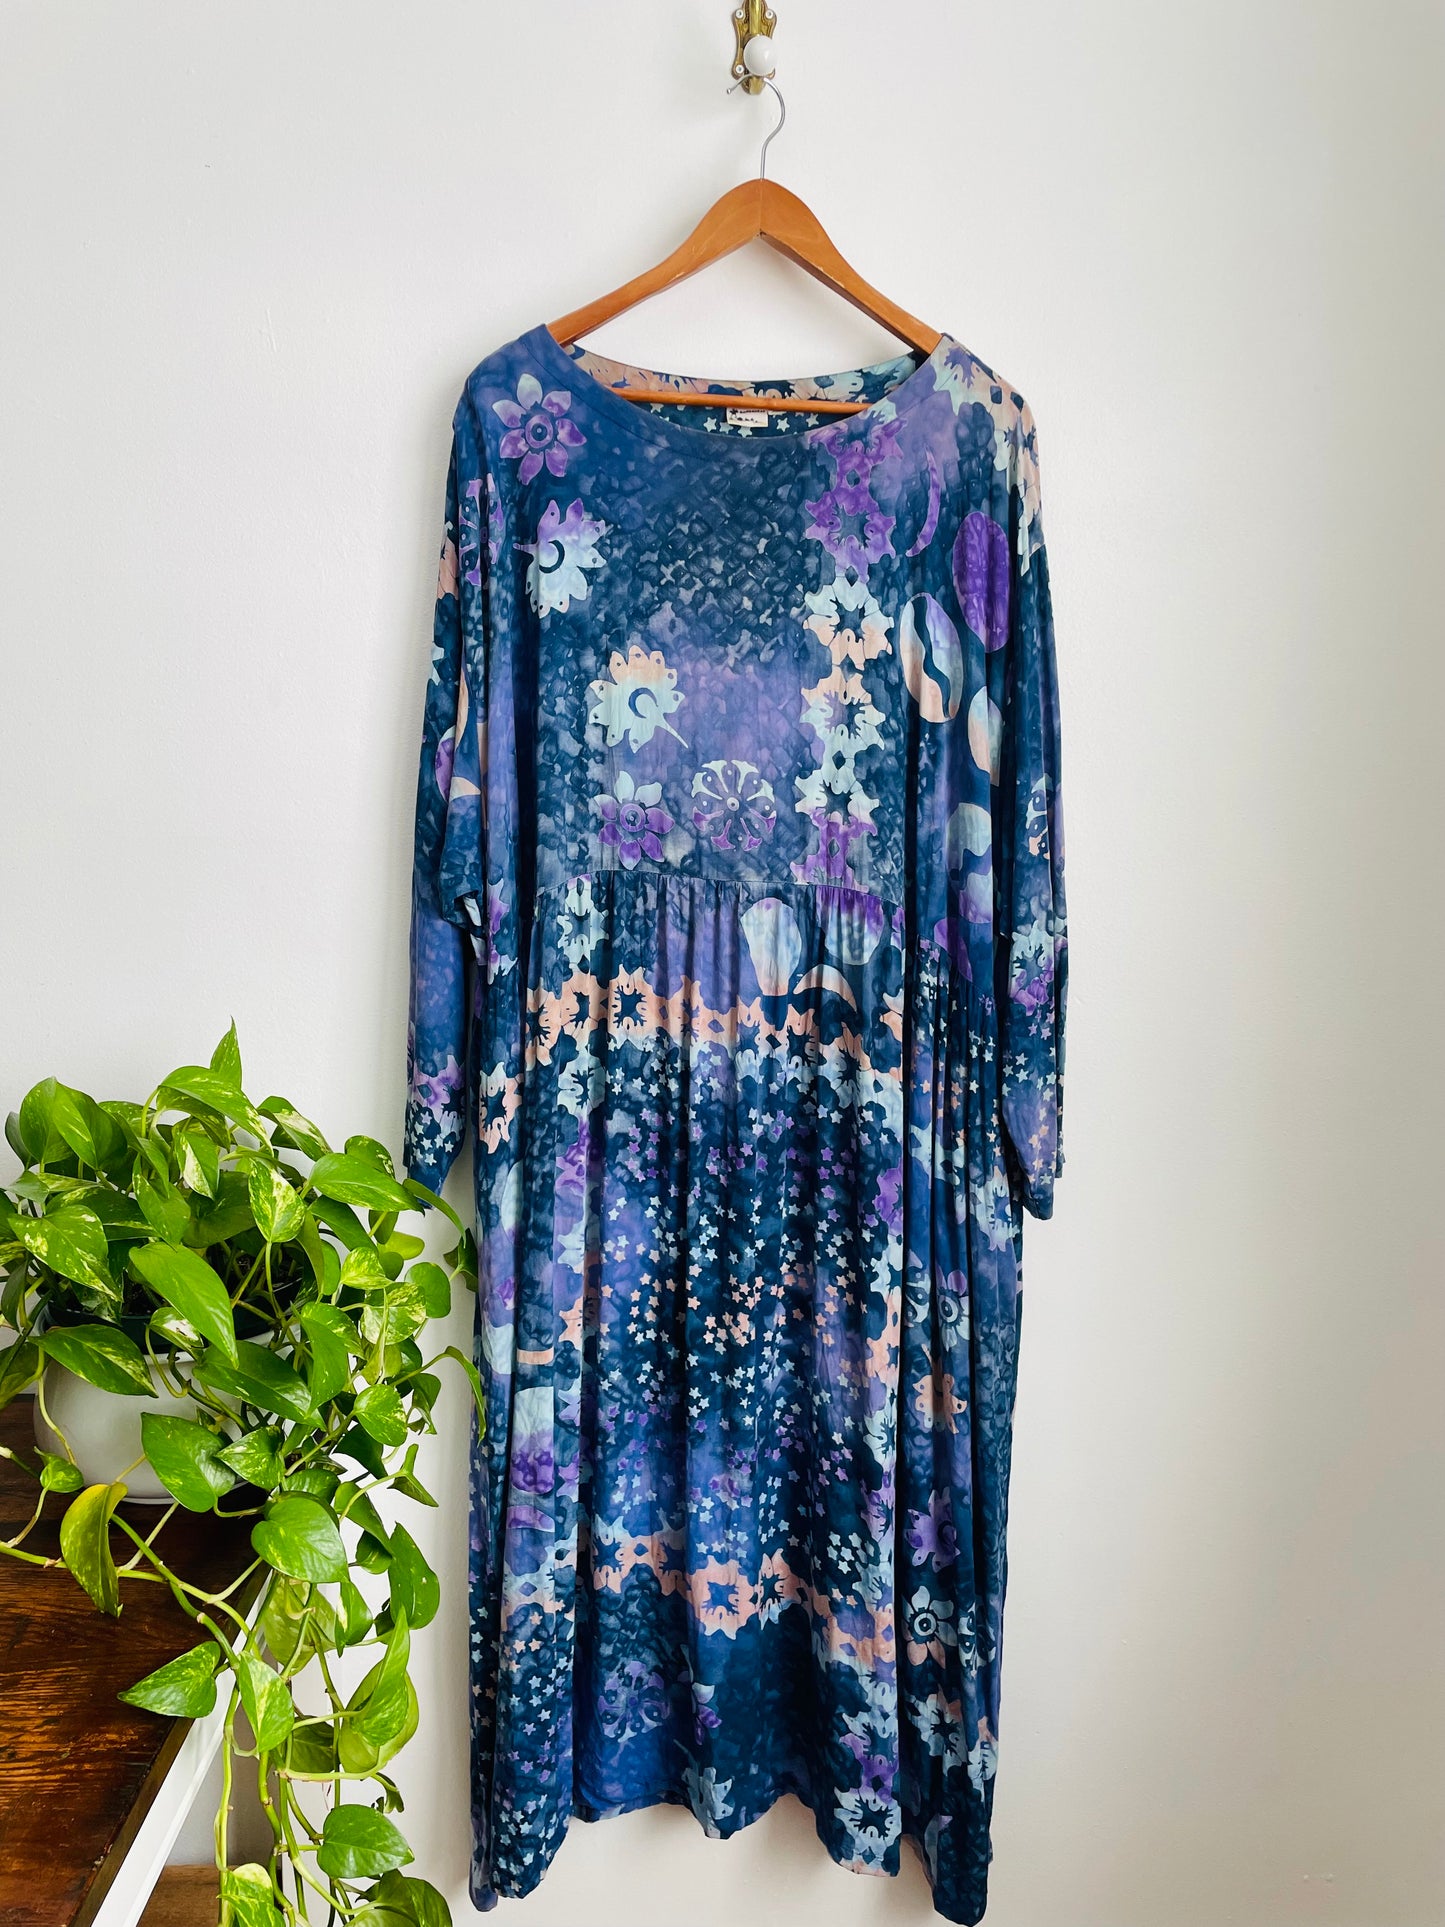 100% Rayon Maxi Dress with Pockets & Batik-Style Celestial Design - Made in Indonesia - Fits up to Size 4x